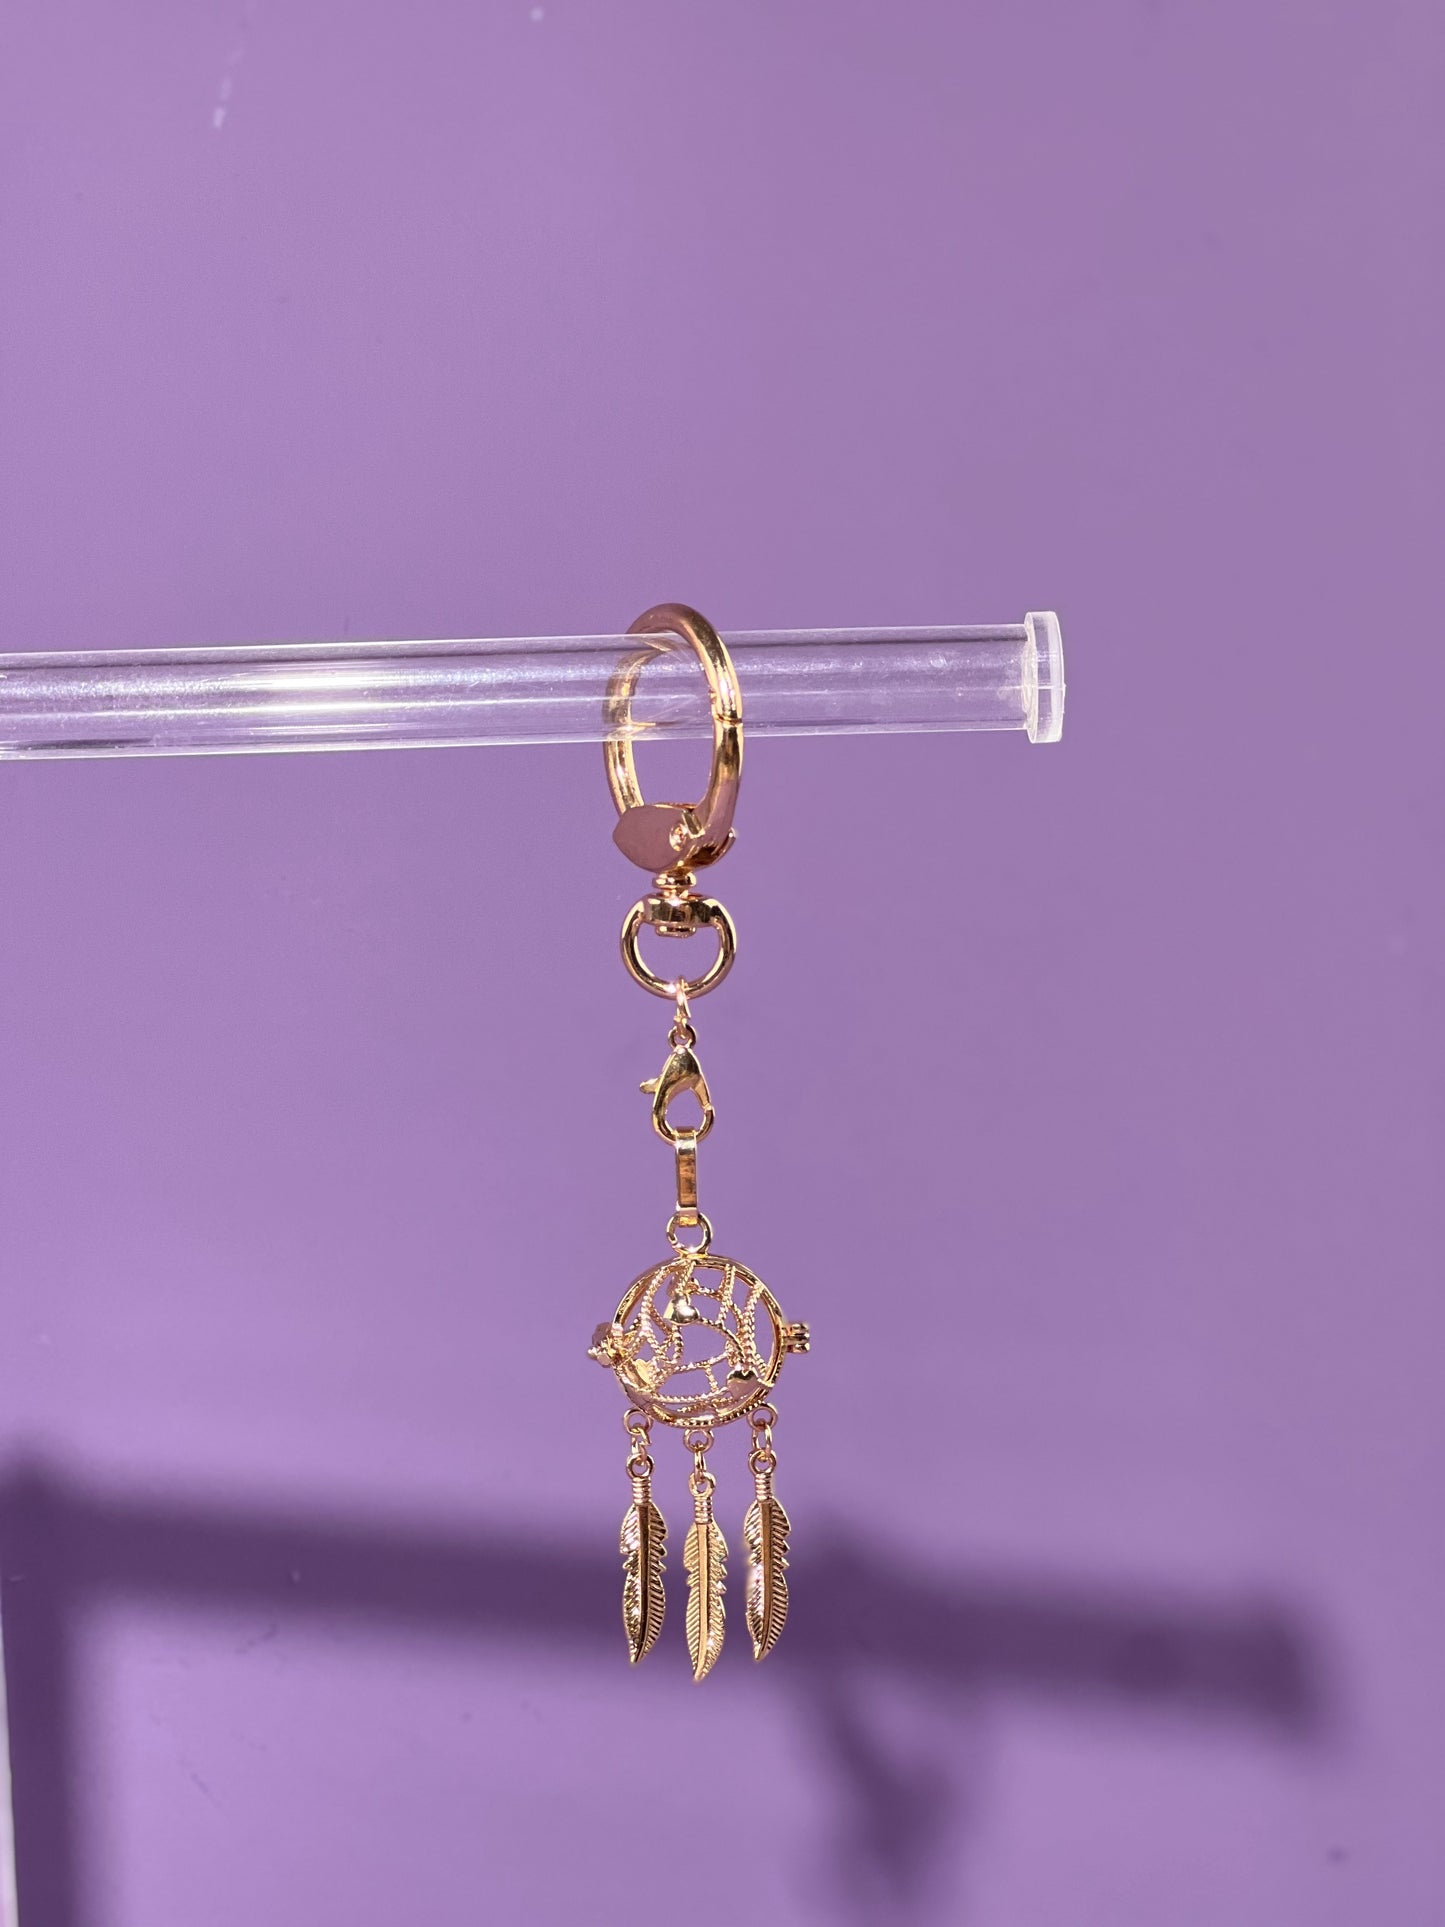 Heart Dreamcatcher Locket Bag Charm and Necklace